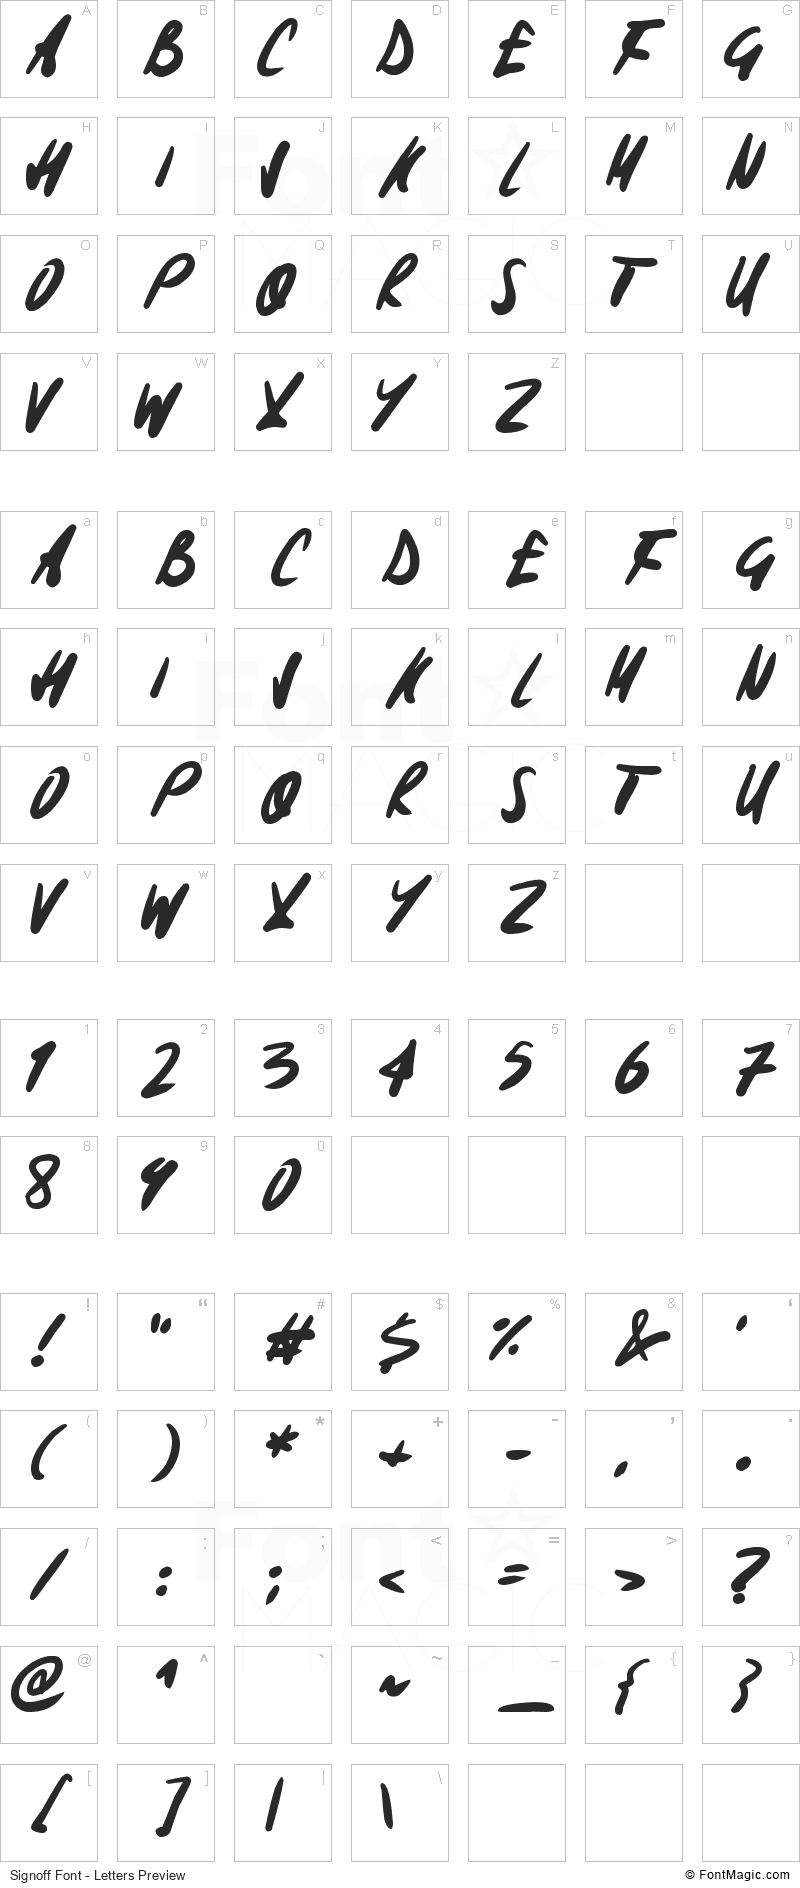 Signoff Font - All Latters Preview Chart